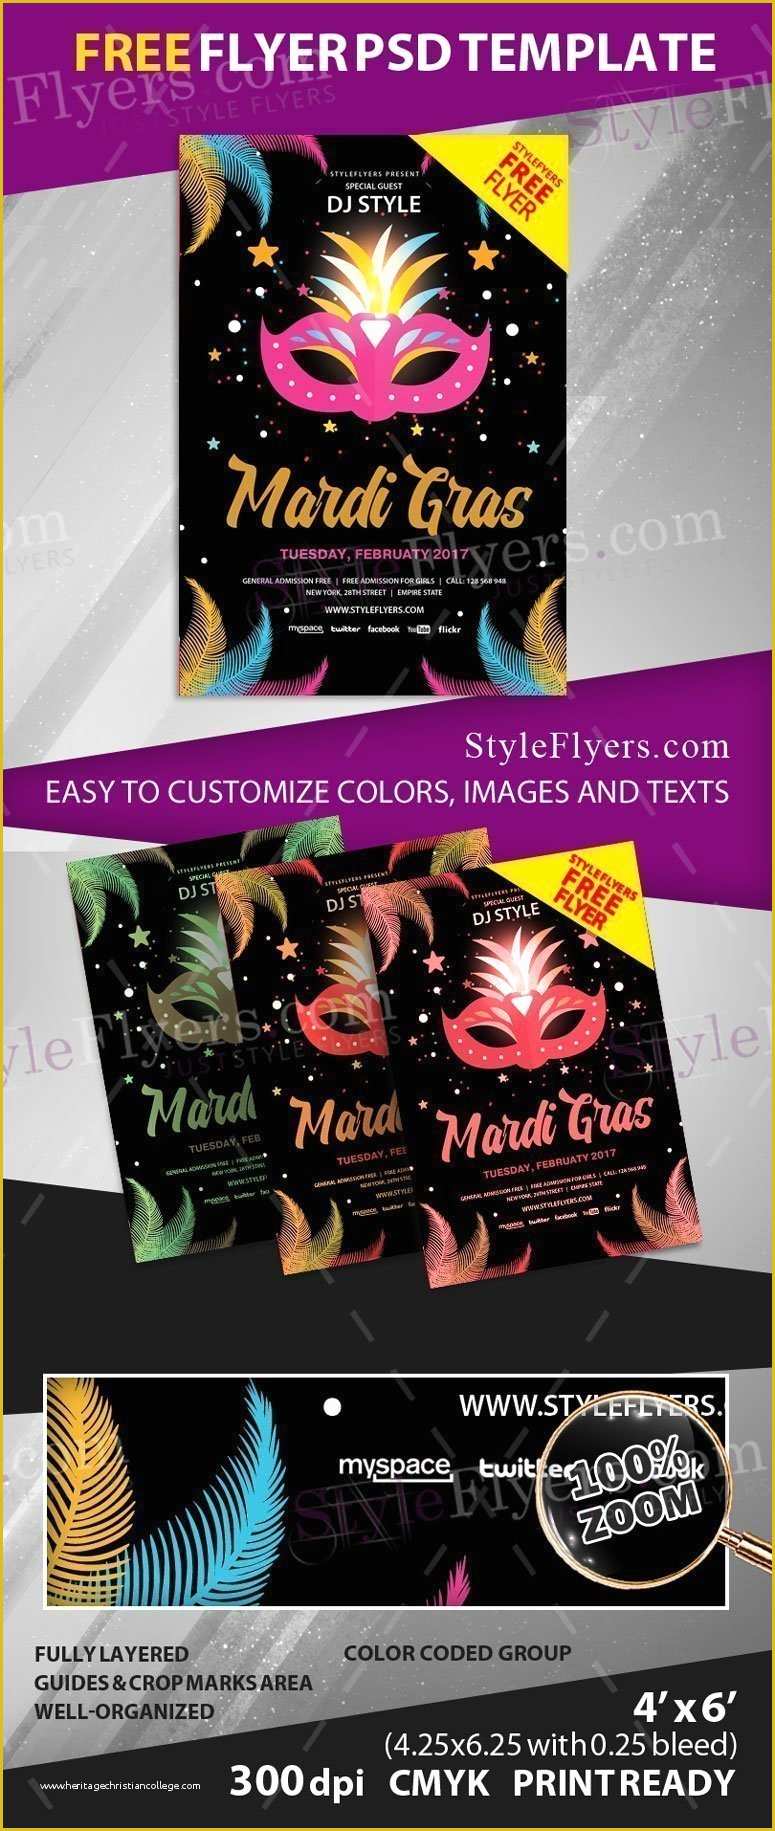 Mardi Gras Flyer Template Free Download Of Mardi Gras Free Psd Flyer Template Free Download